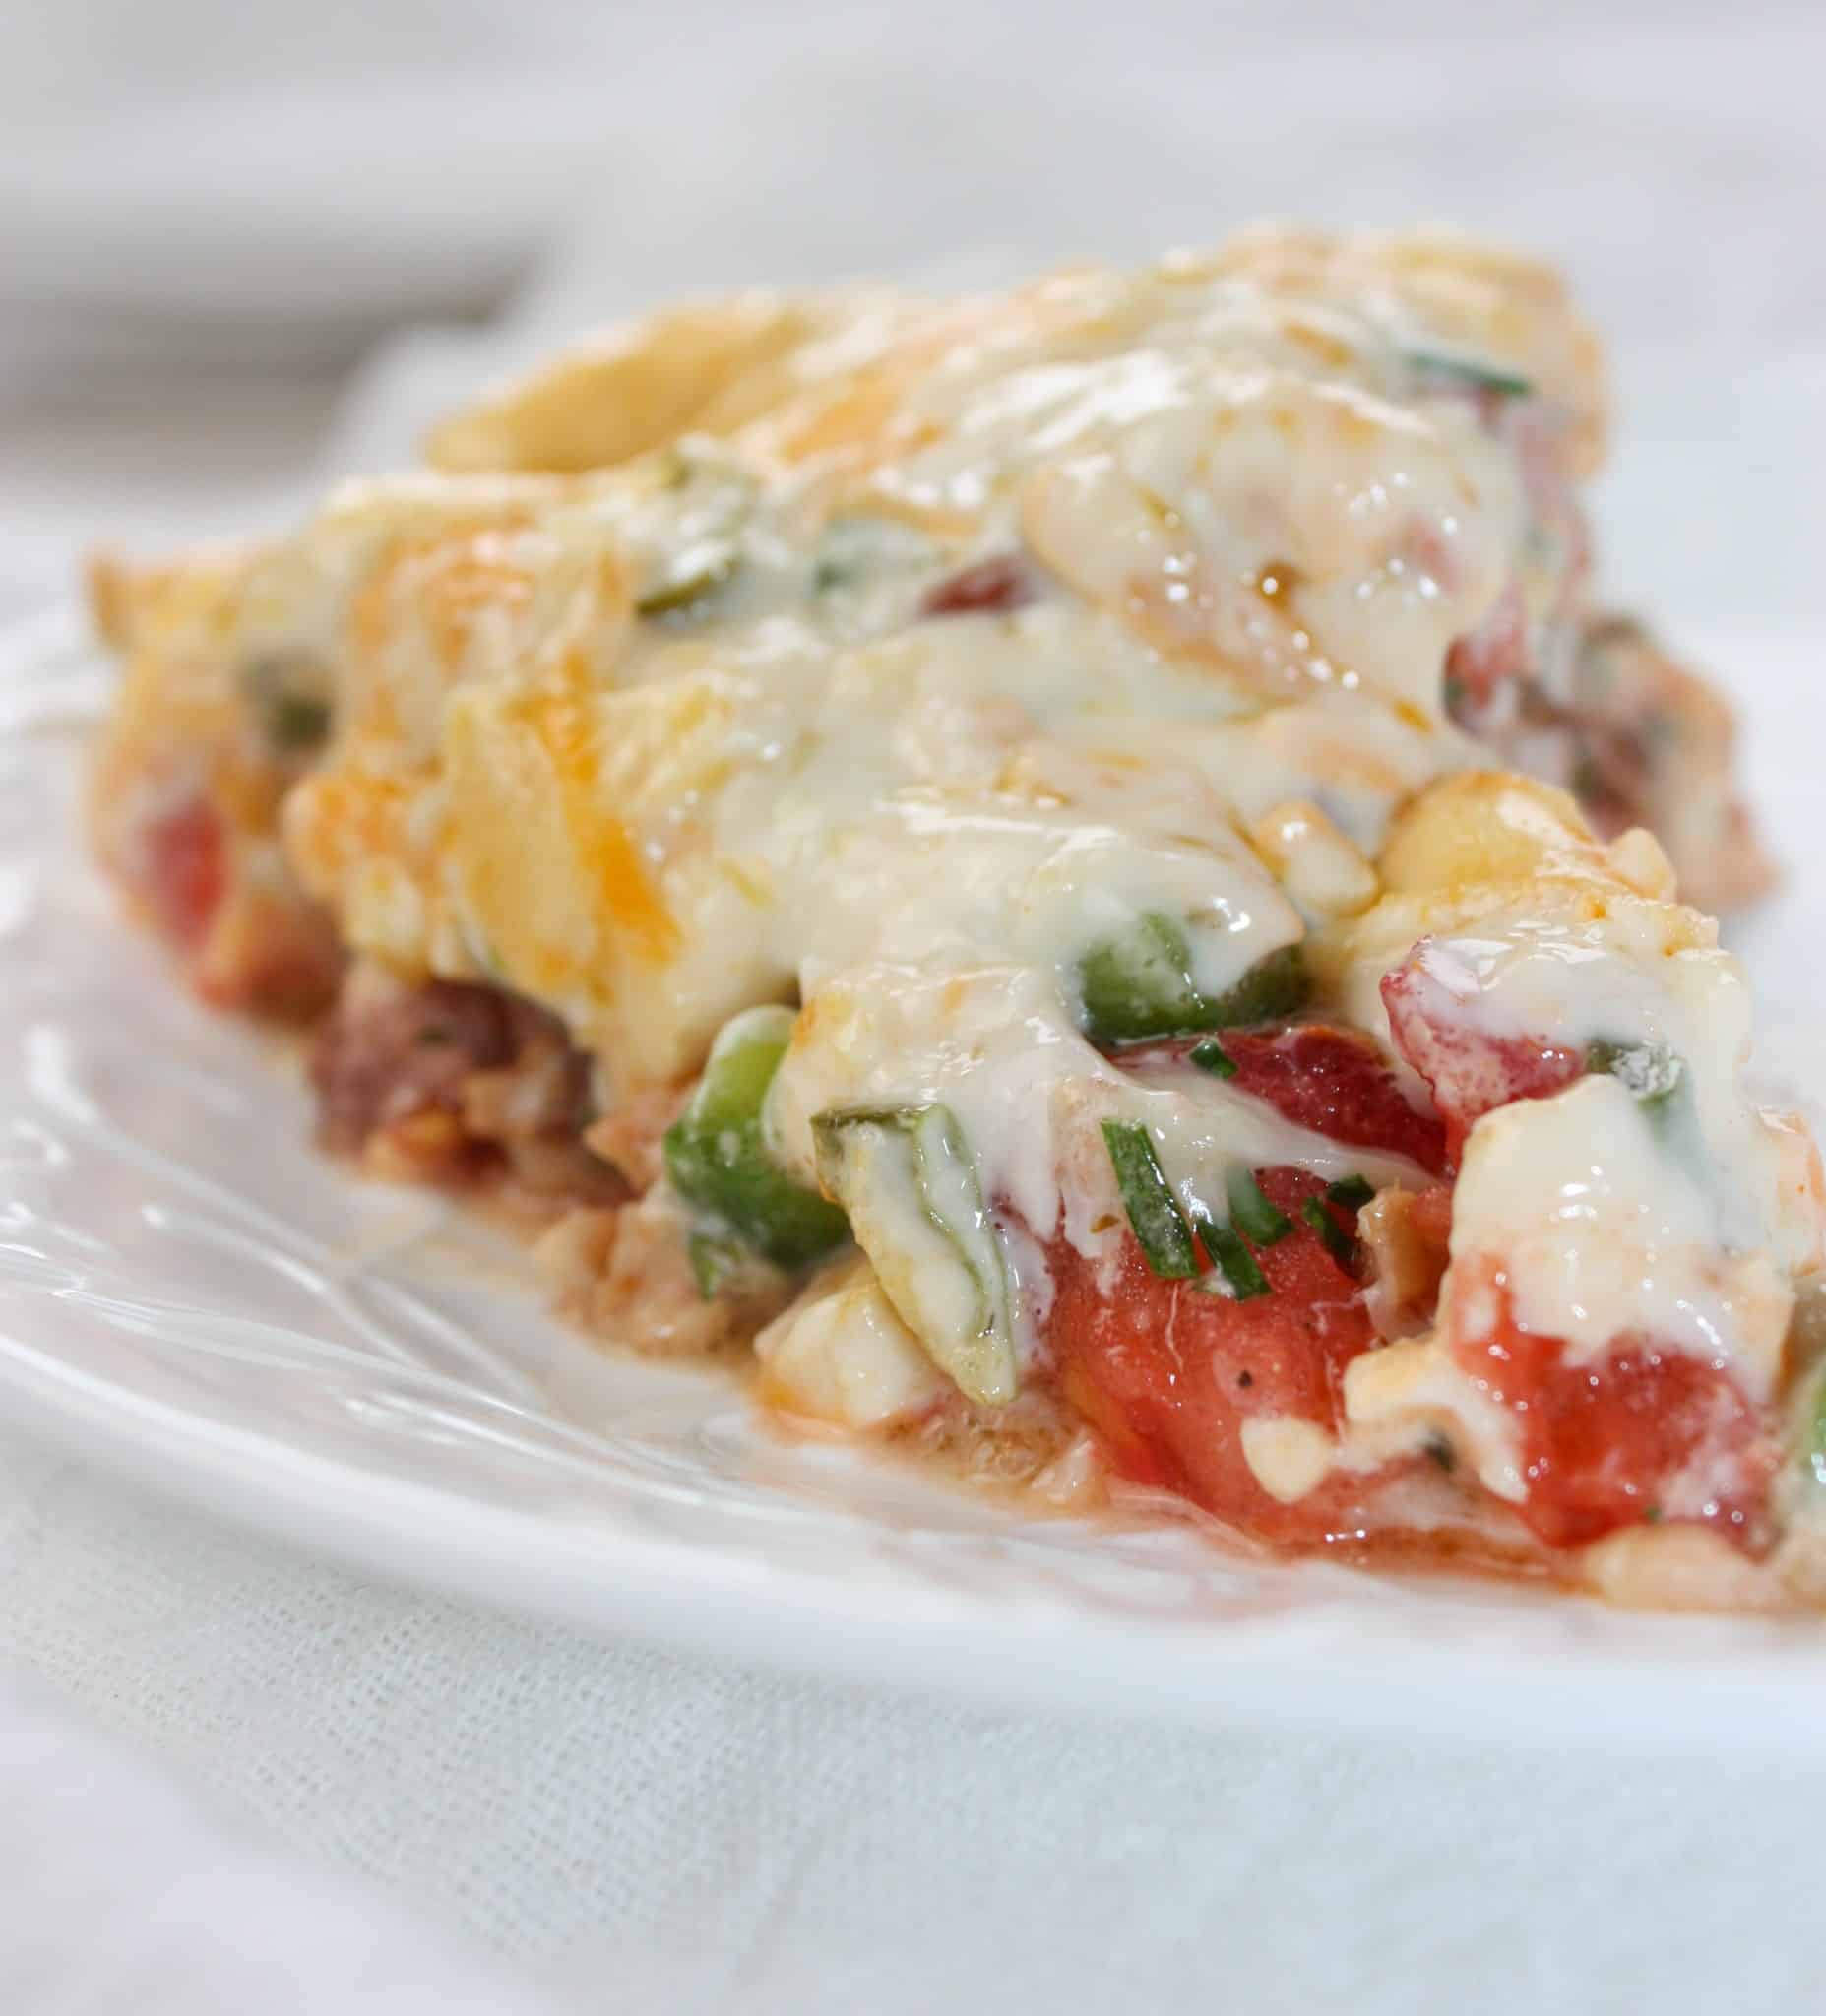 Tomato Pie is a versatile and tasty recipe that can easily be made gluten free with your choice of pie crust.  This cheesy, tomato dish can stand alone or complement any main course.